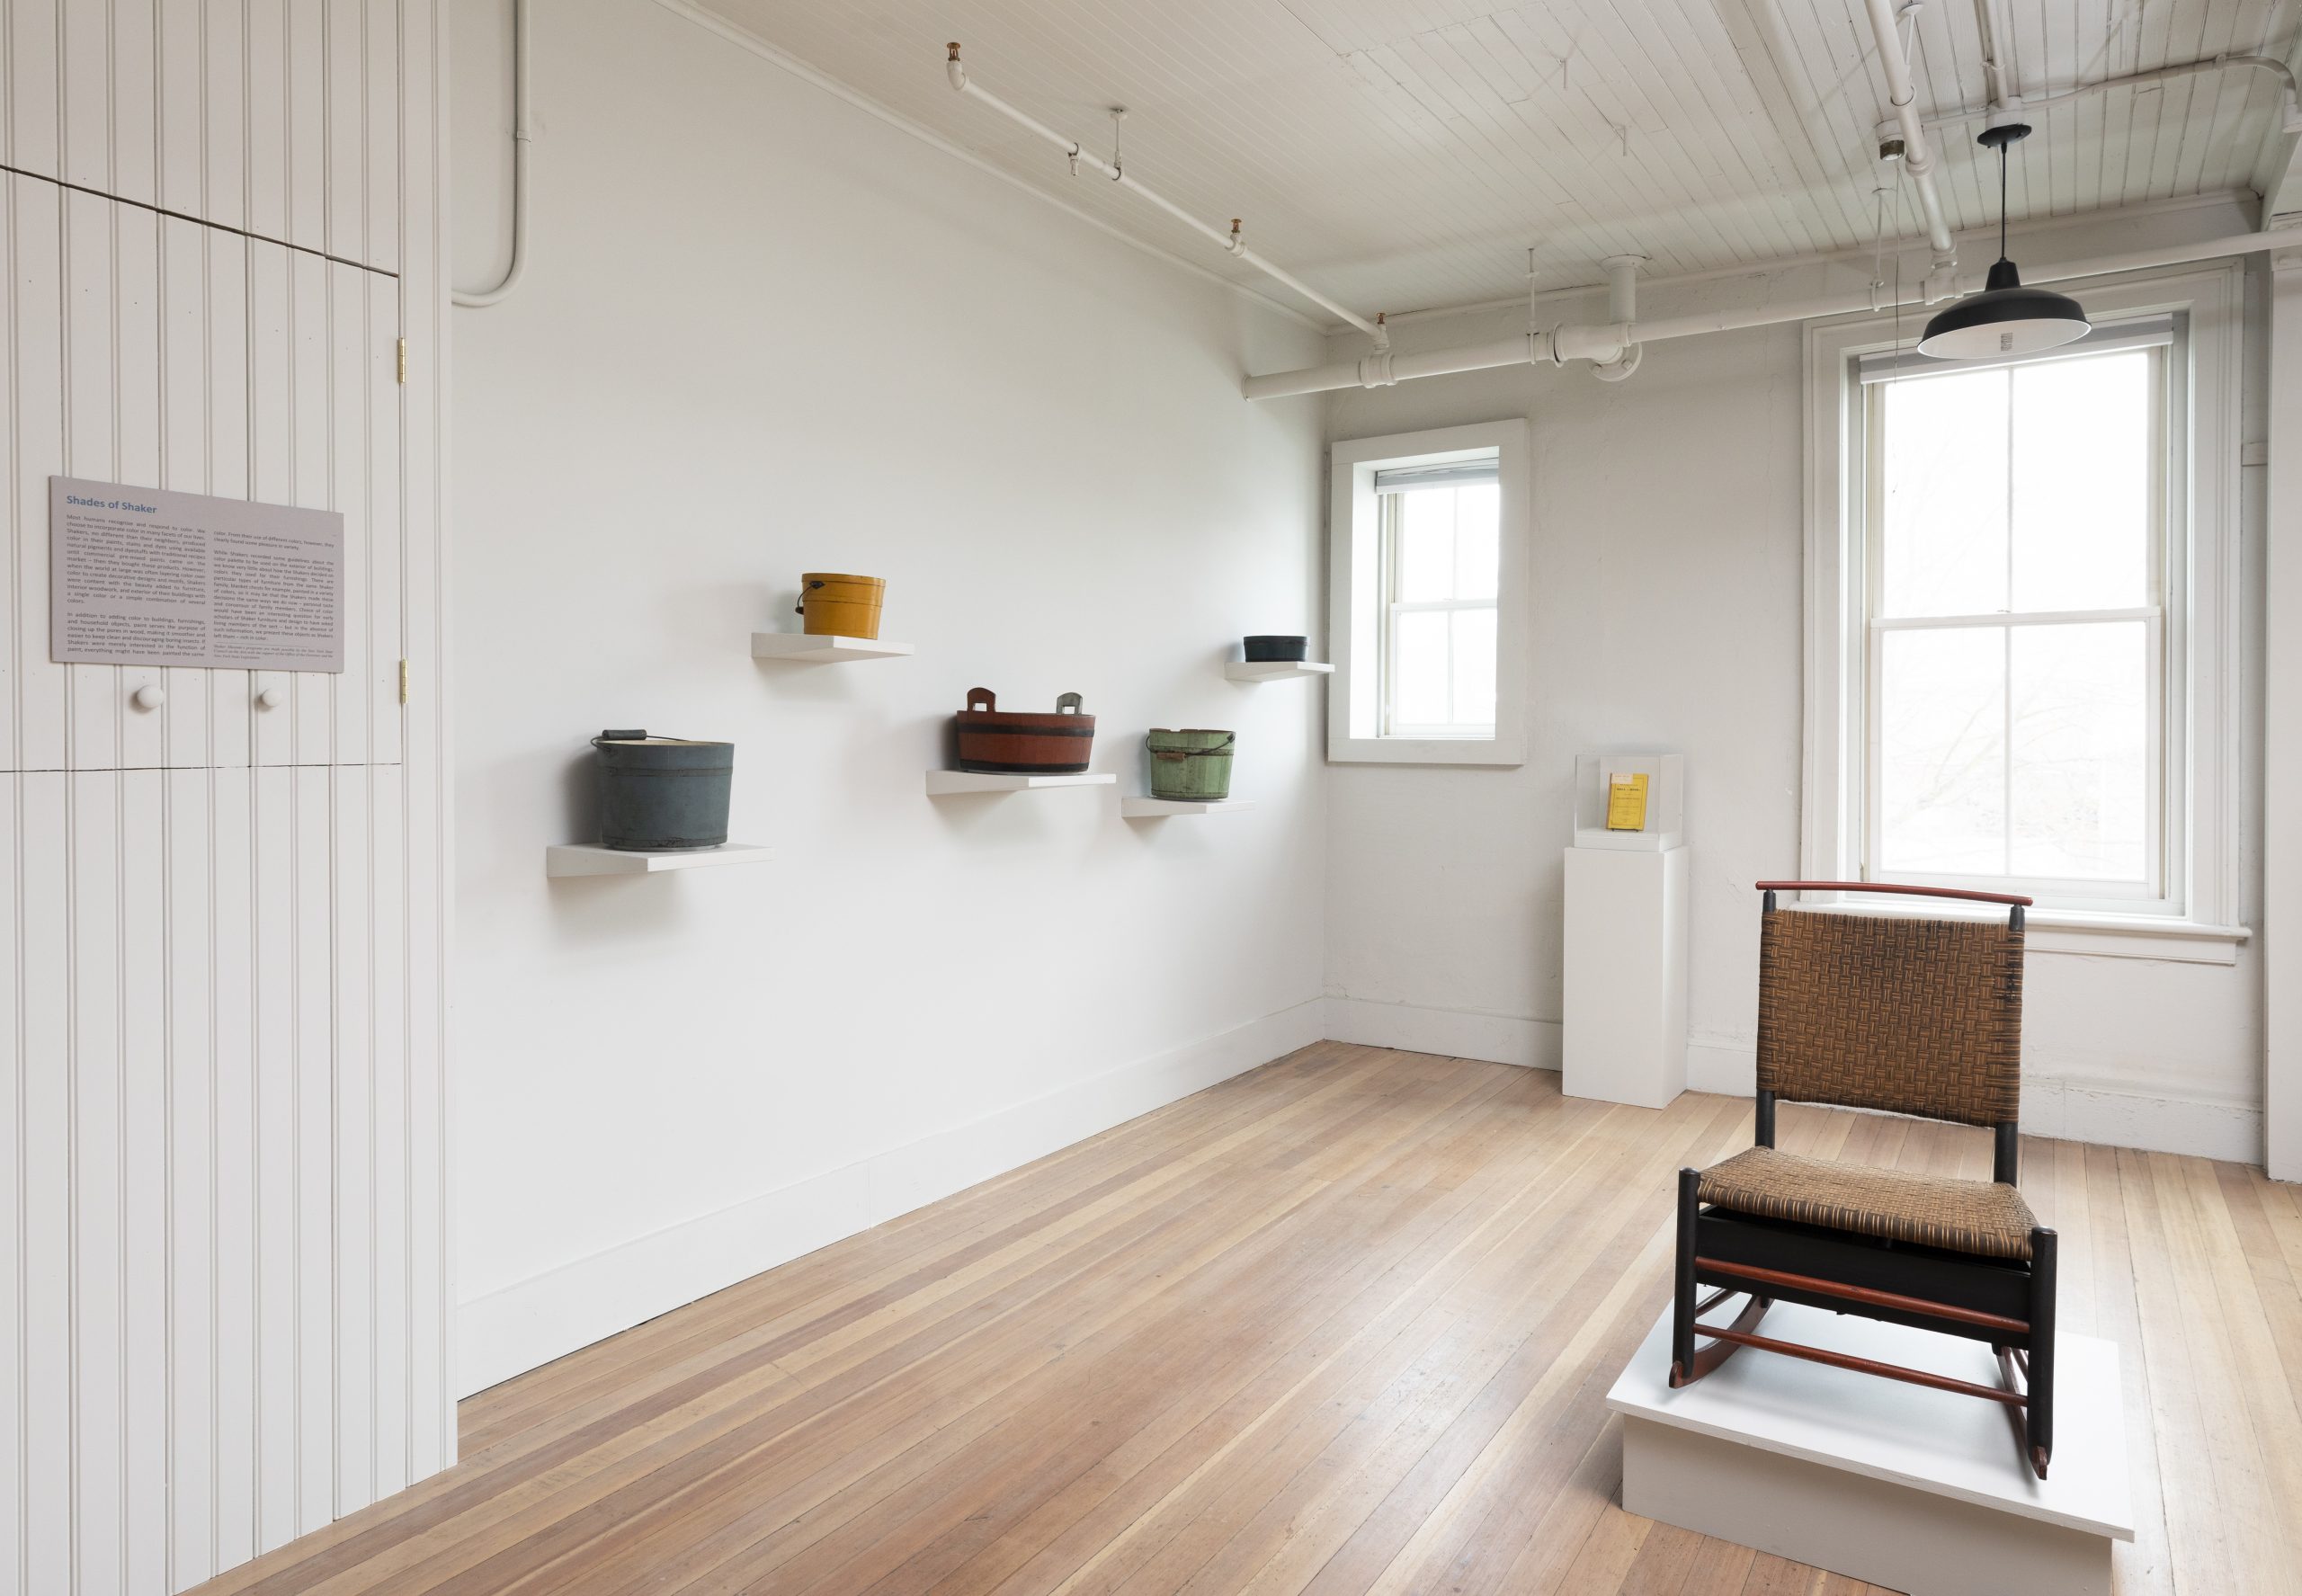 Minimalist art gallery interior with pottery displayed on wall shelves and a single chair in the foreground.